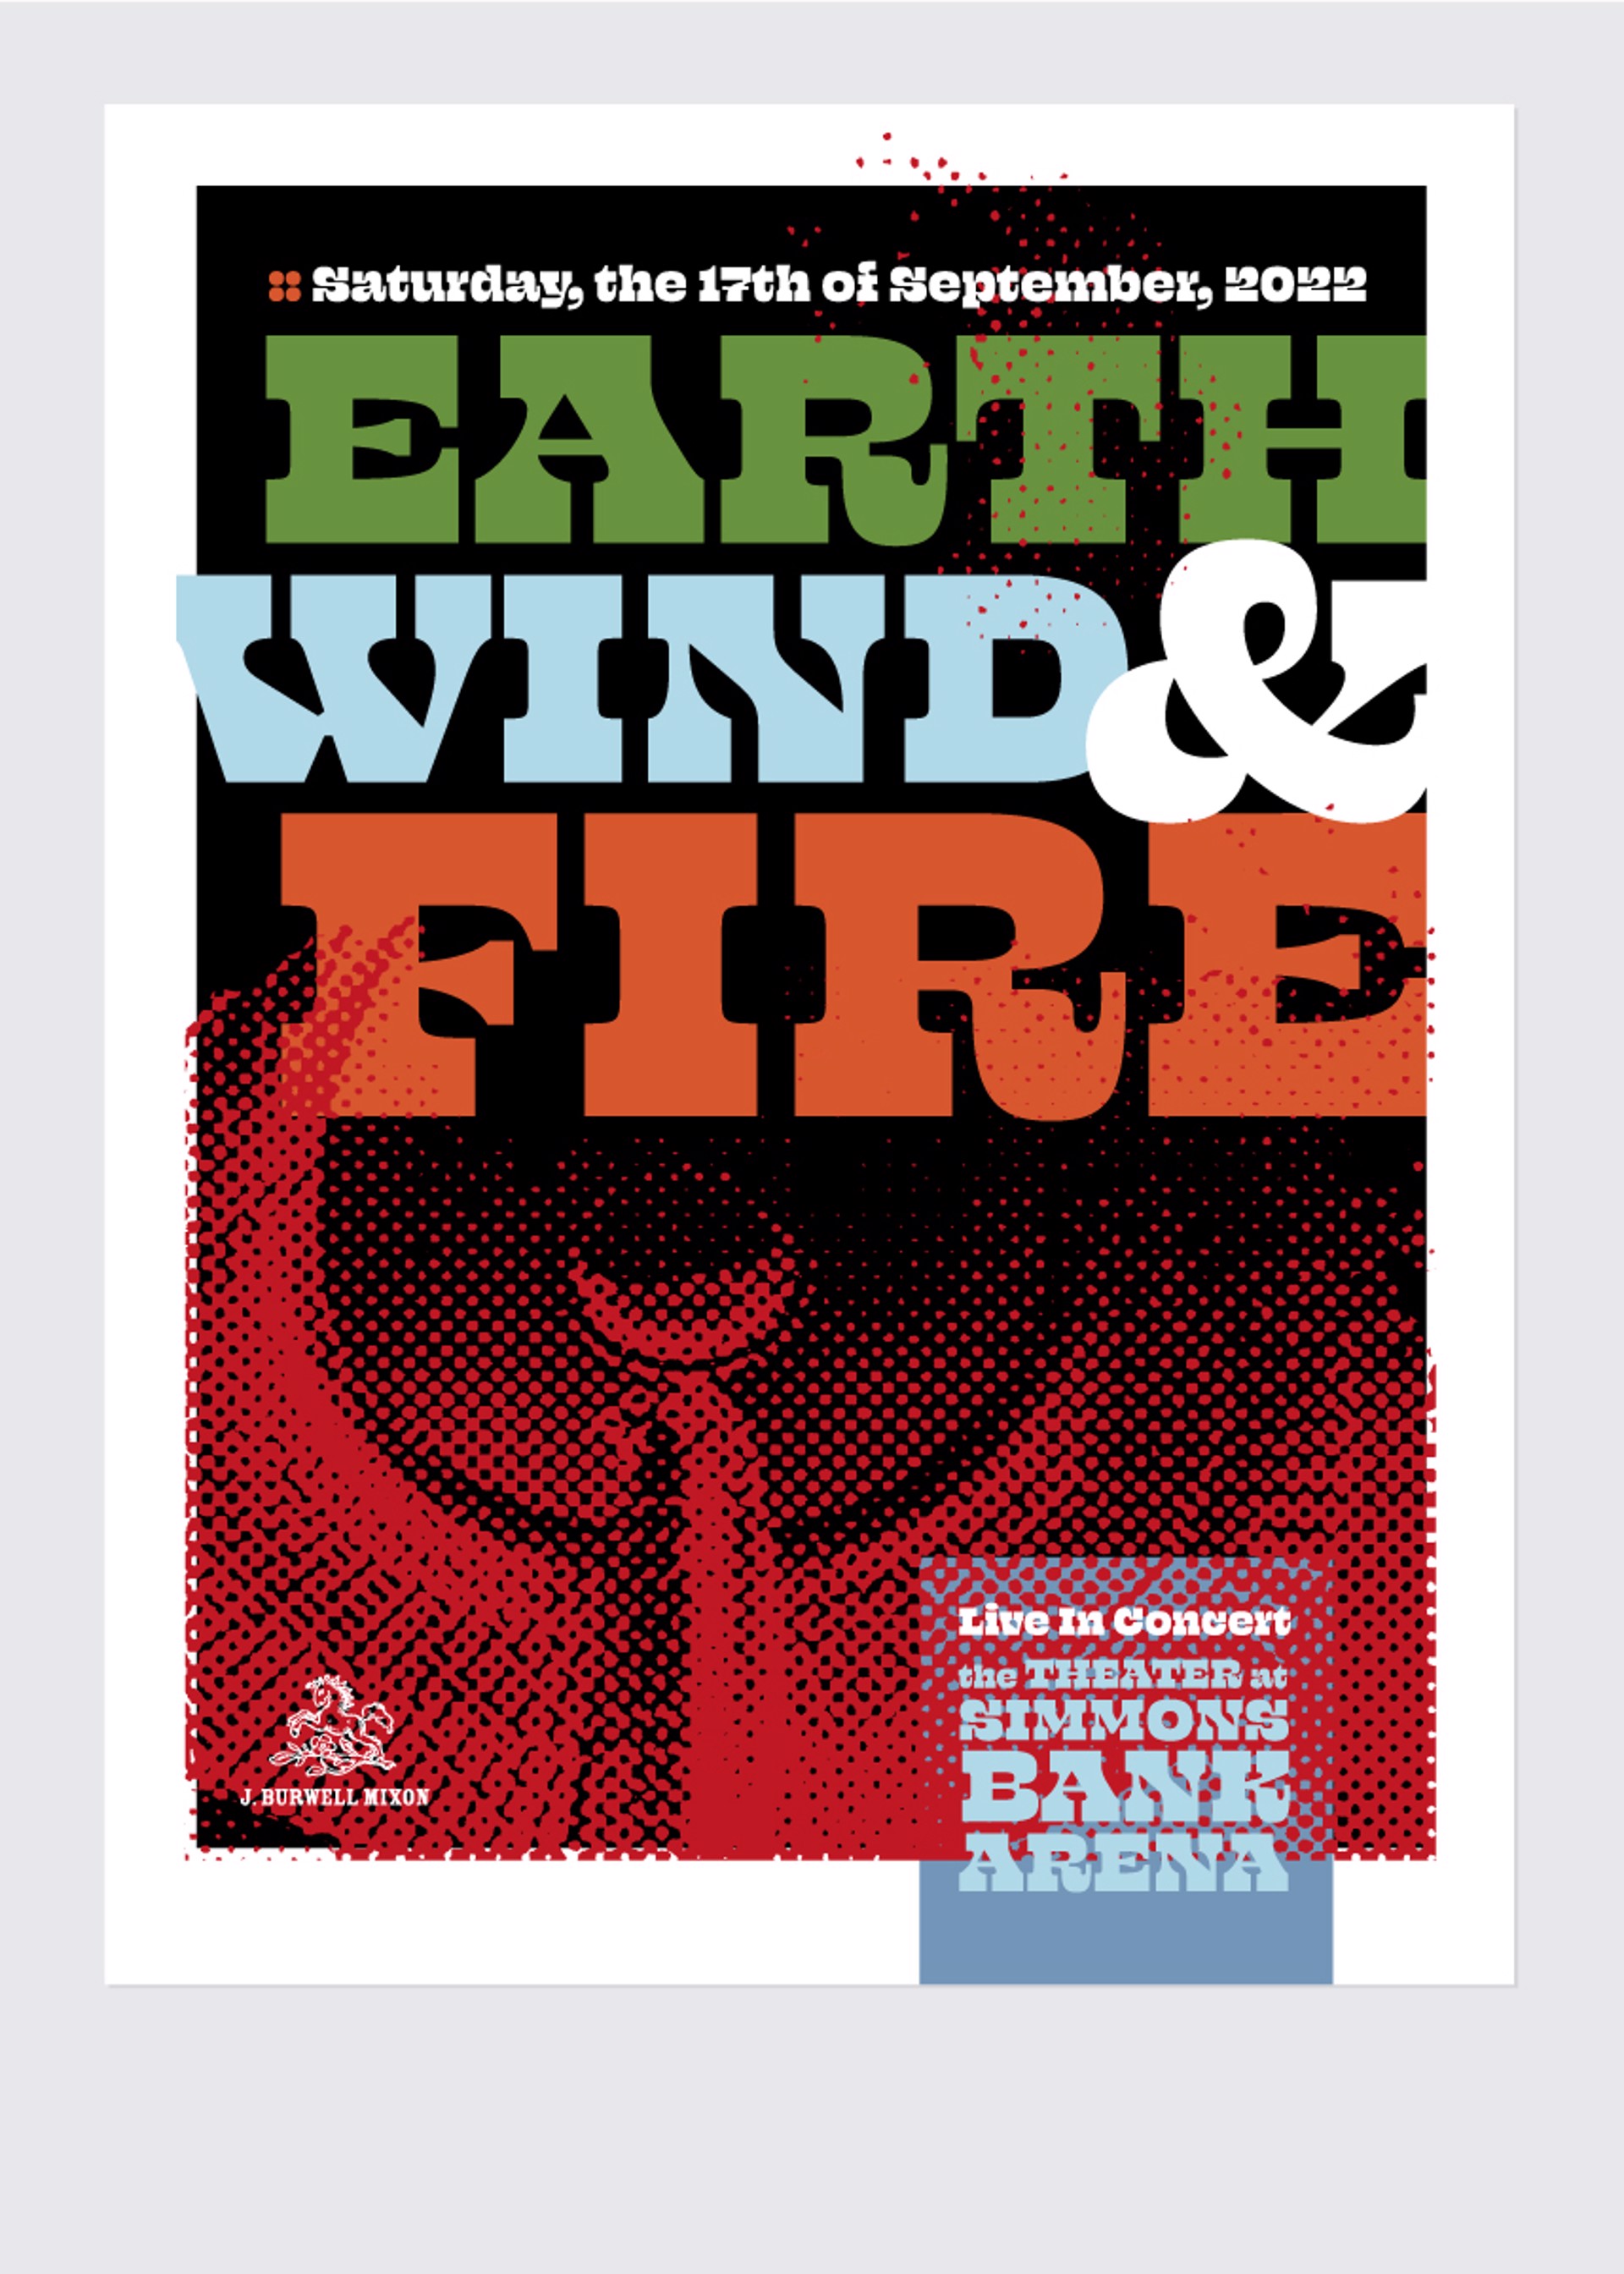 Earth Wind and Fire Concert Poster by Jamie Burwell Mixon